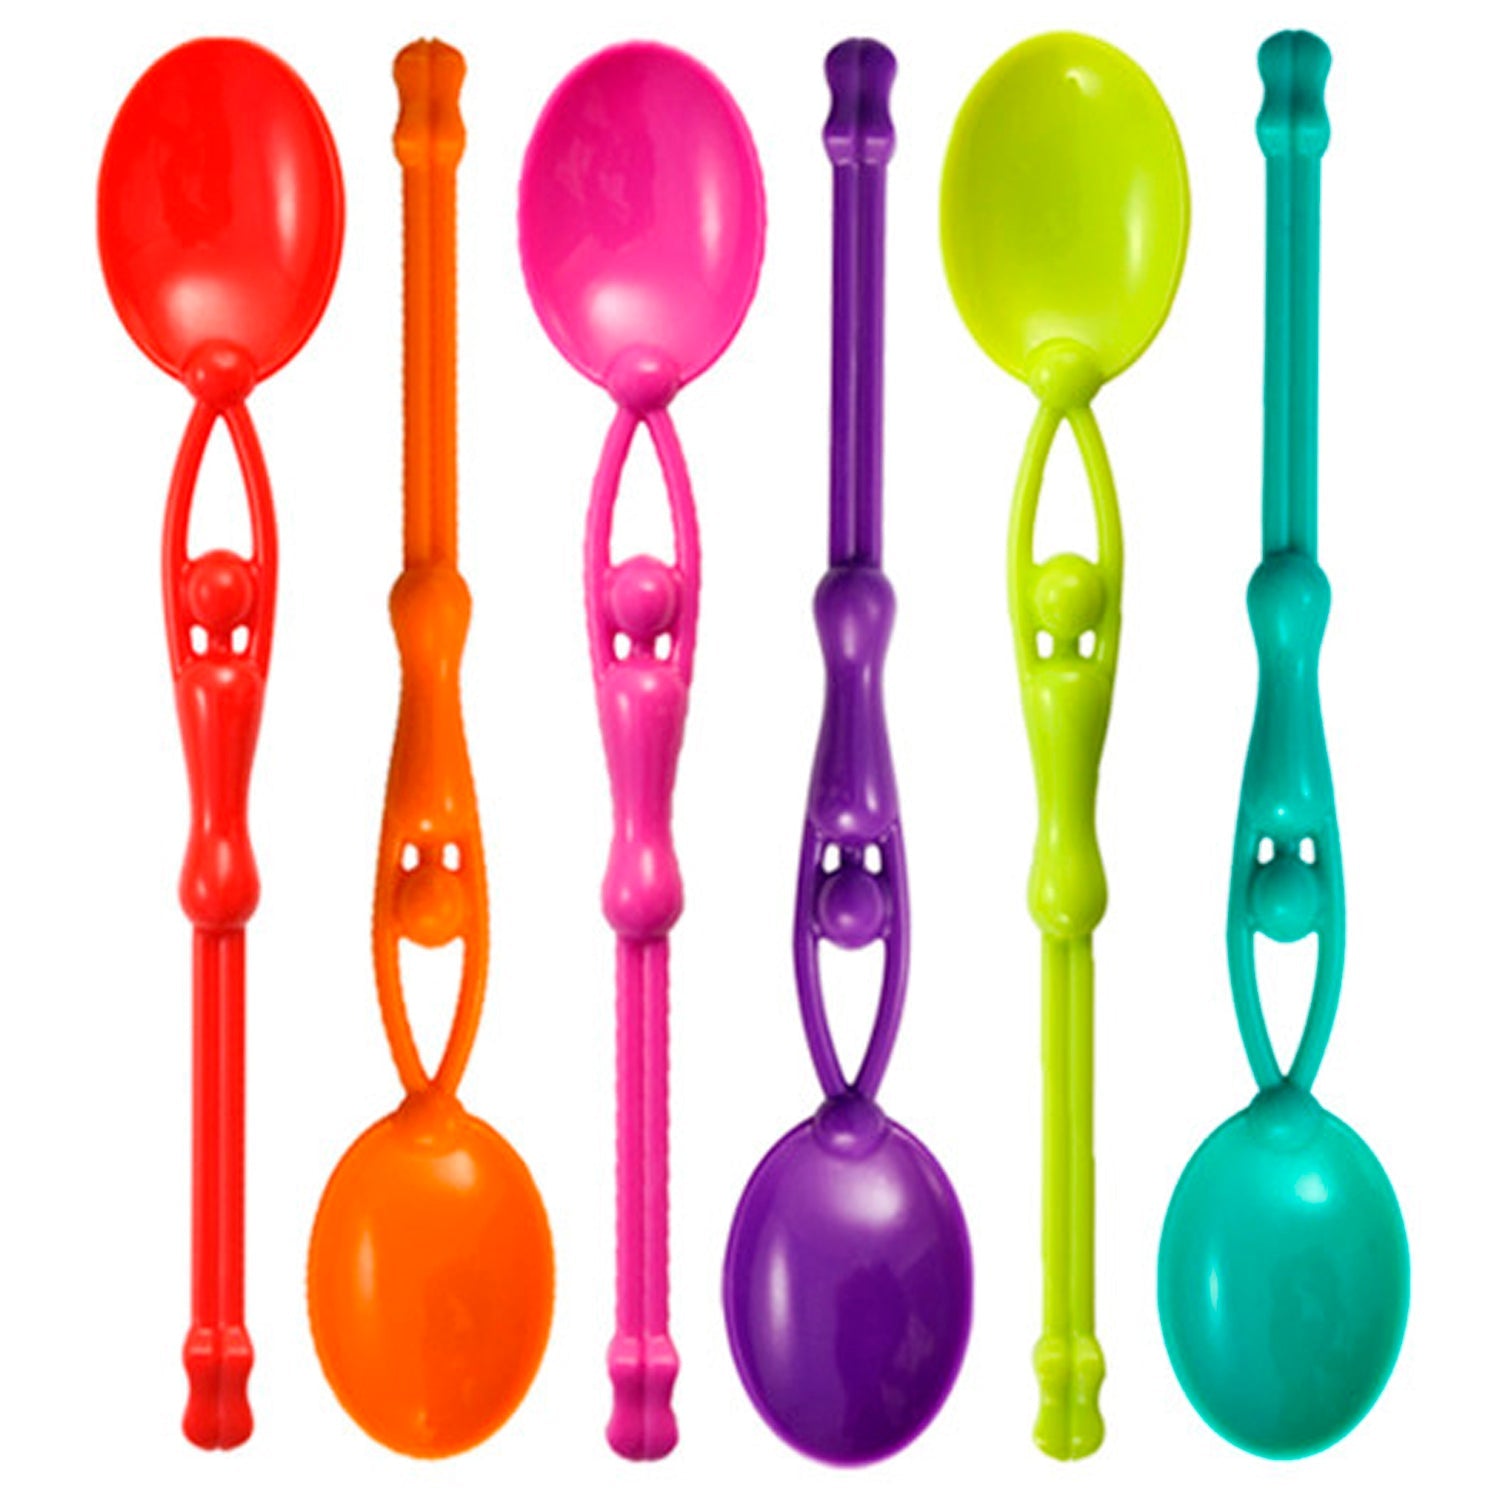 SET OF 6 COLORED TEA SPOONS